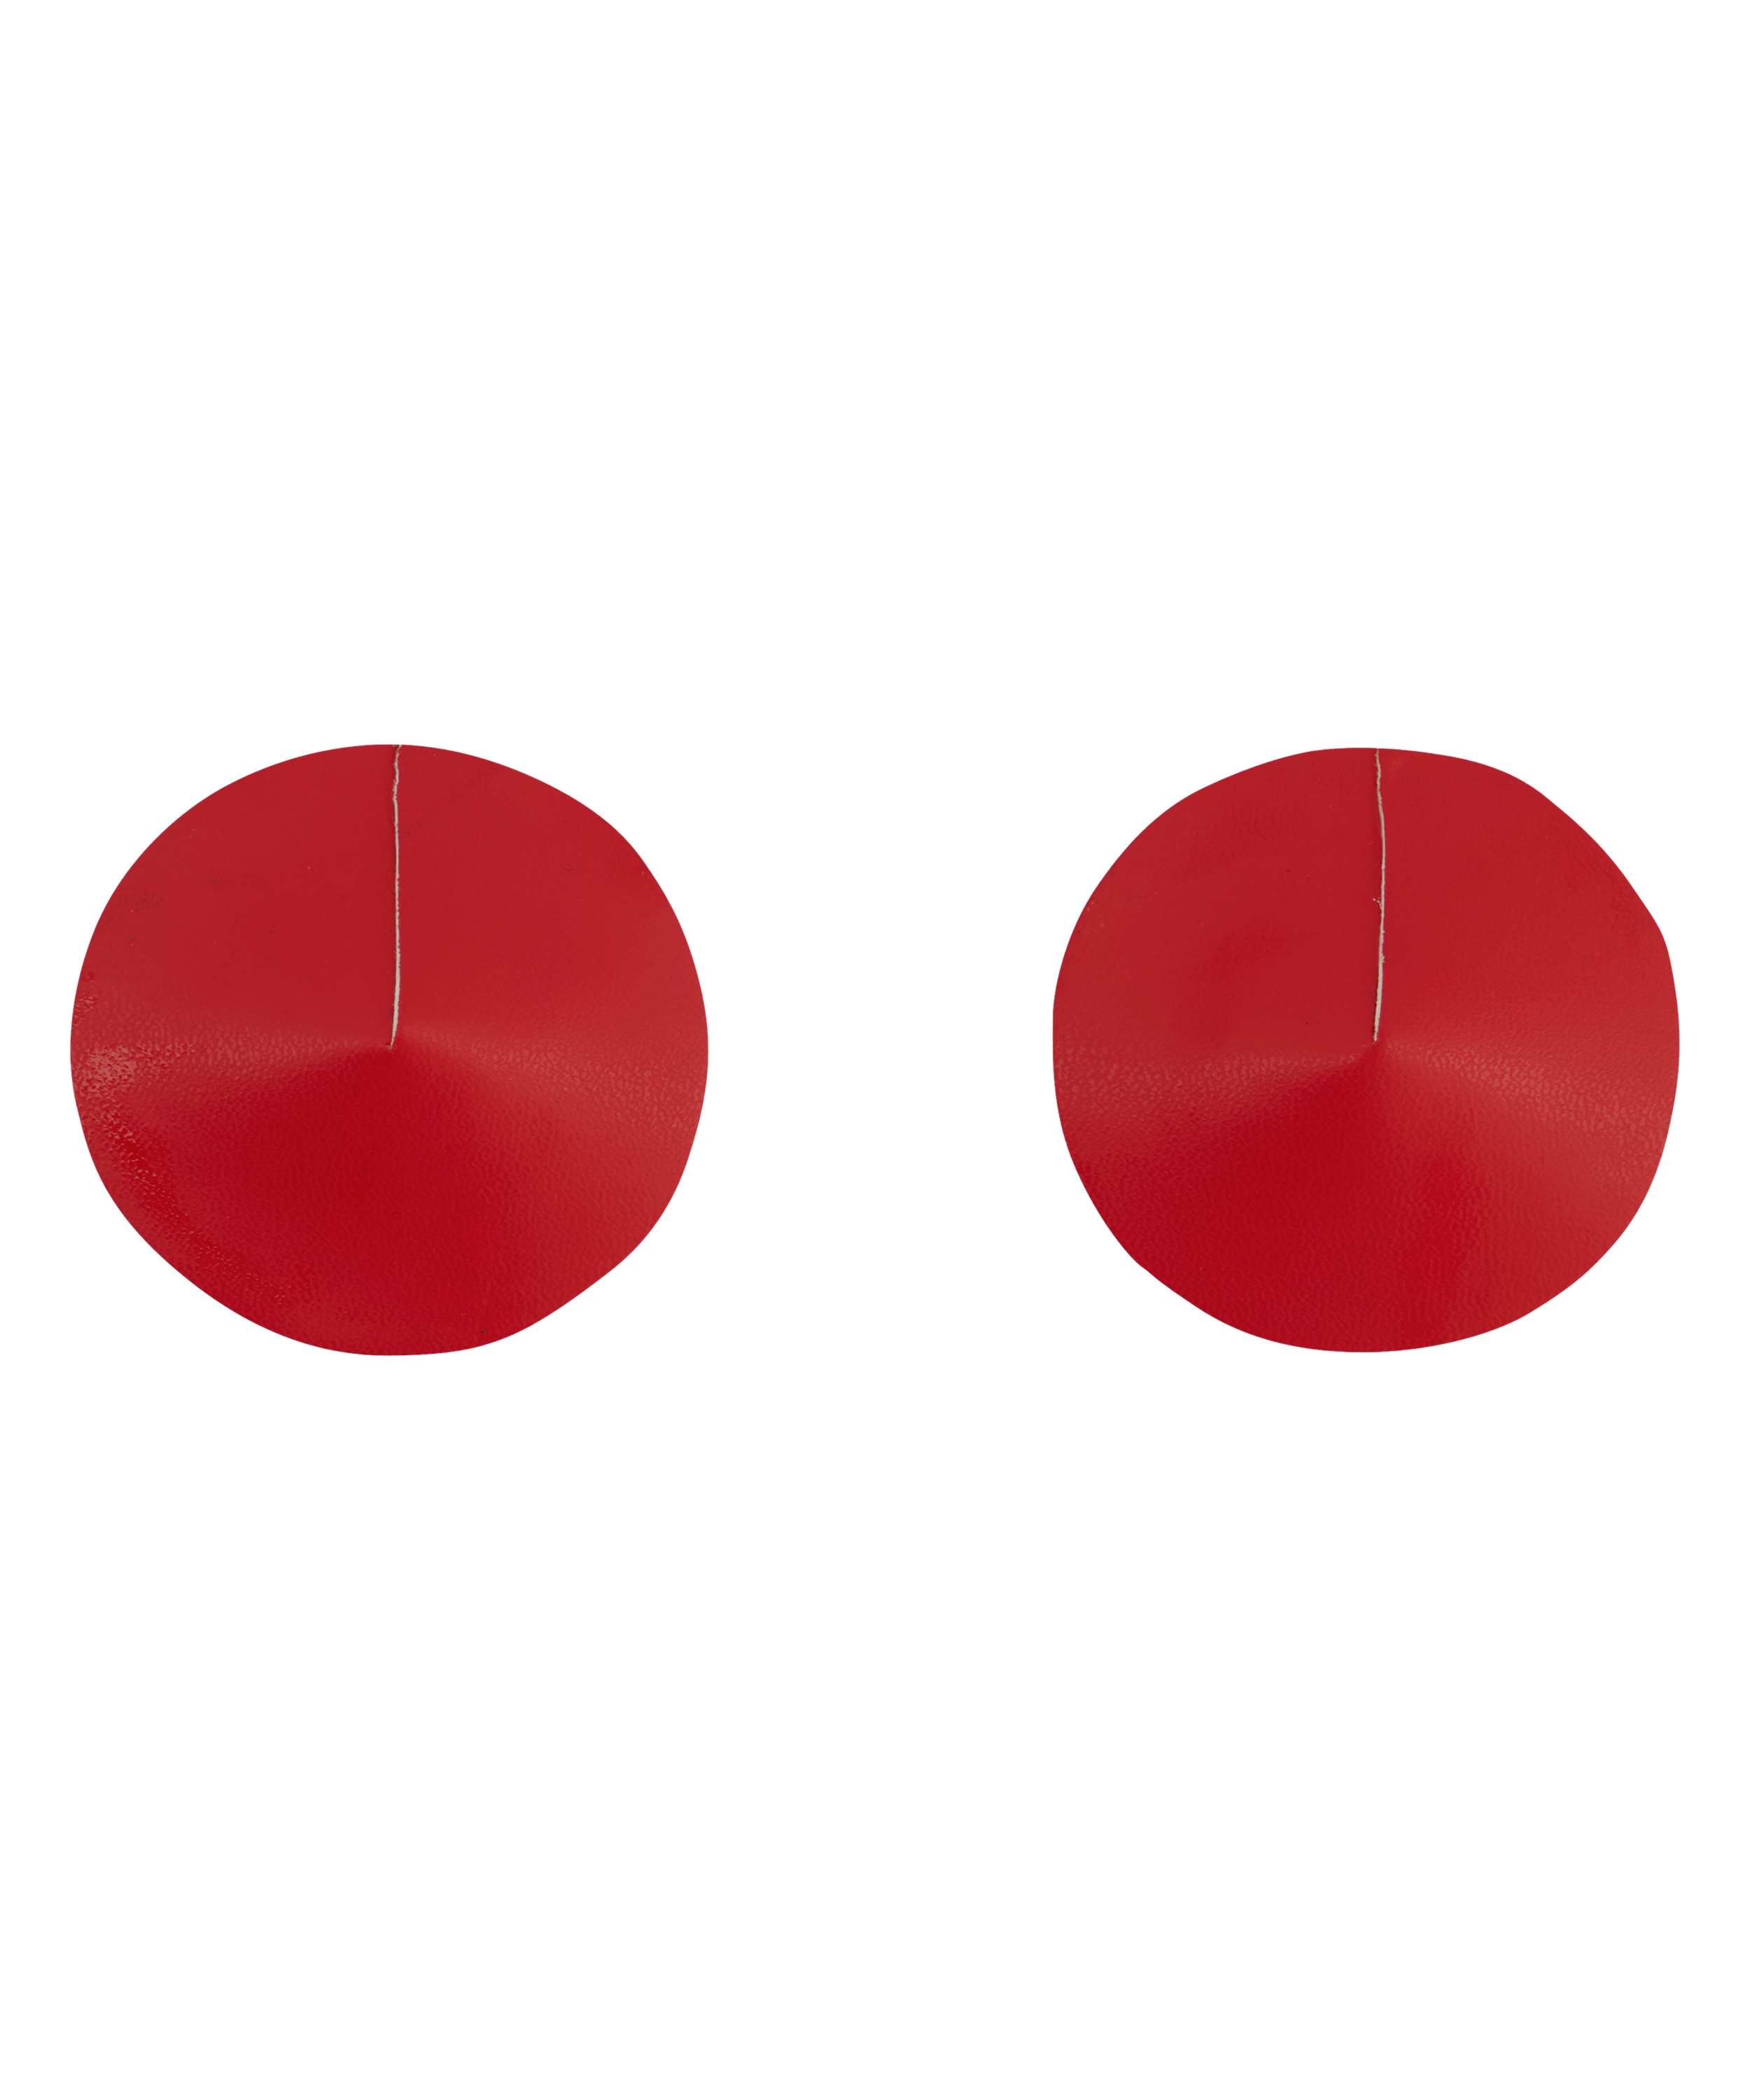 Private nipple covers, Red, main